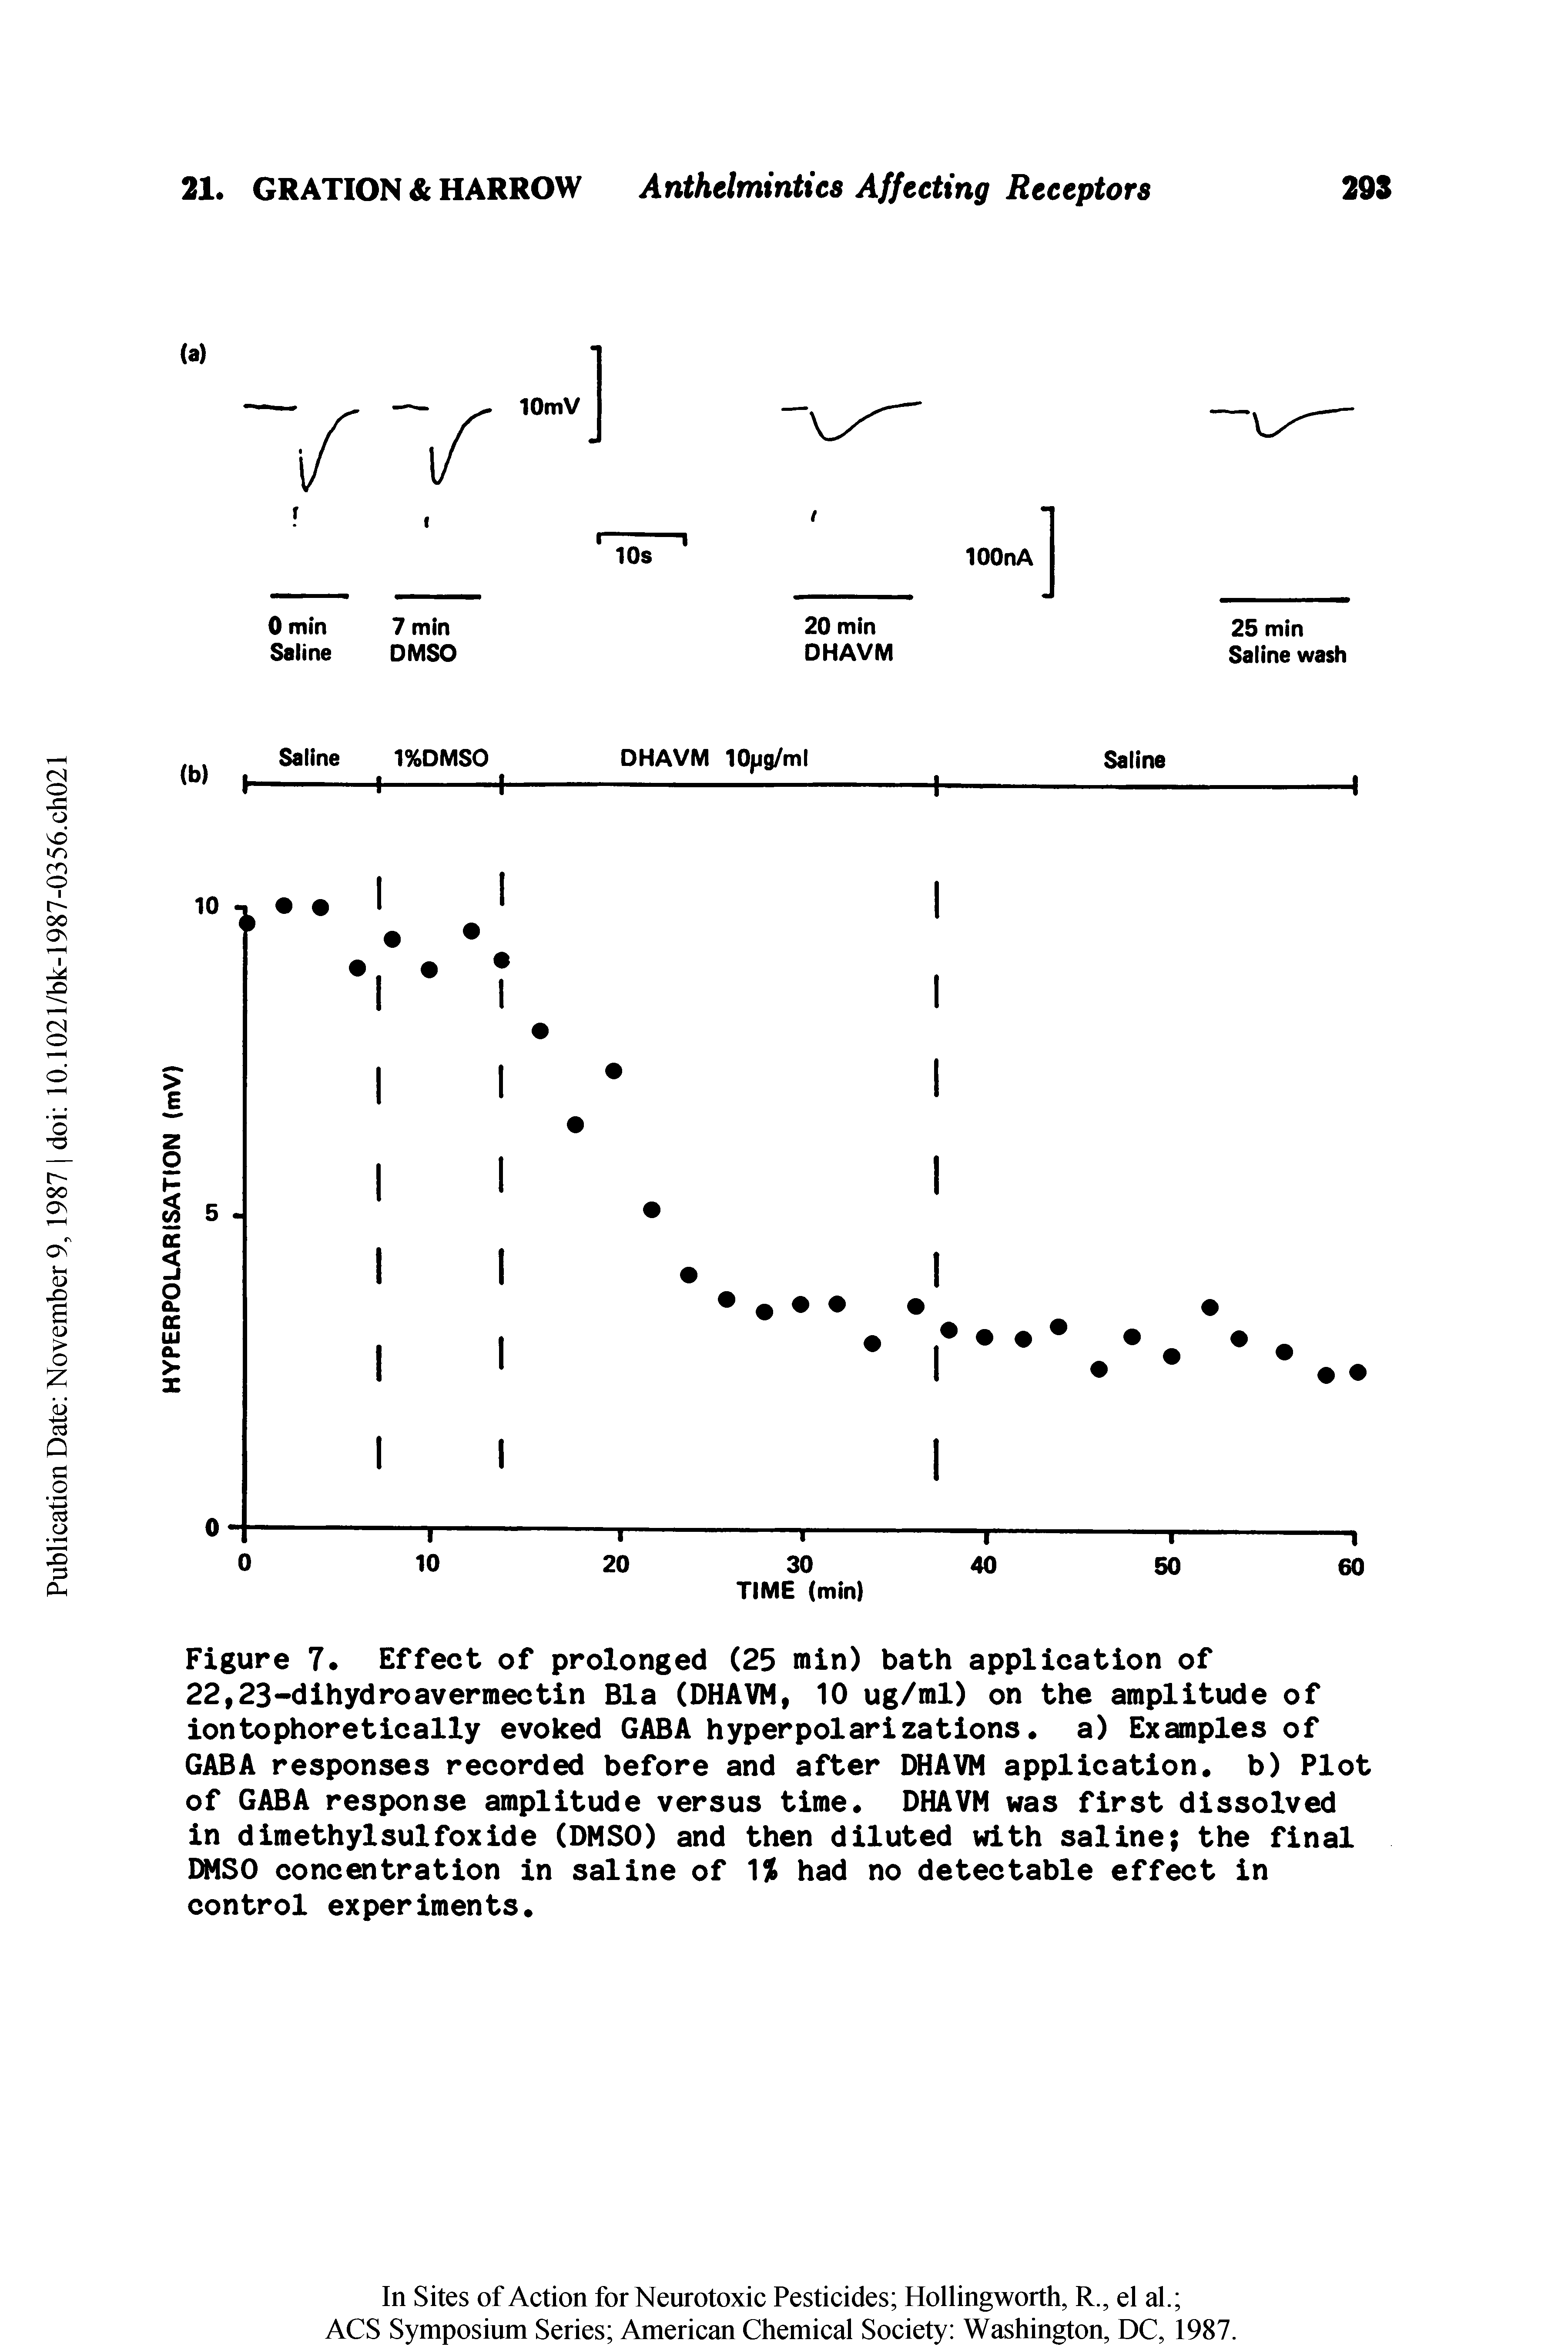 Figure 7. Effect of prolonged (25 min) bath application of 22,23-dihydroavermectin Bla (DHAVM, 10 ug/ml) on the amplitude of iontophoretically evoked GABA hyperpolarizations a) Examples of GABA responses recorded before and after DHAVM application b) Plot of GABA response amplitude versus time DHAVM was first dissolved in dimethylsulfoxide (DMSO) and then diluted with saline the final DMSO concentration in saline of 1% had no detectable effect in control experiments ...